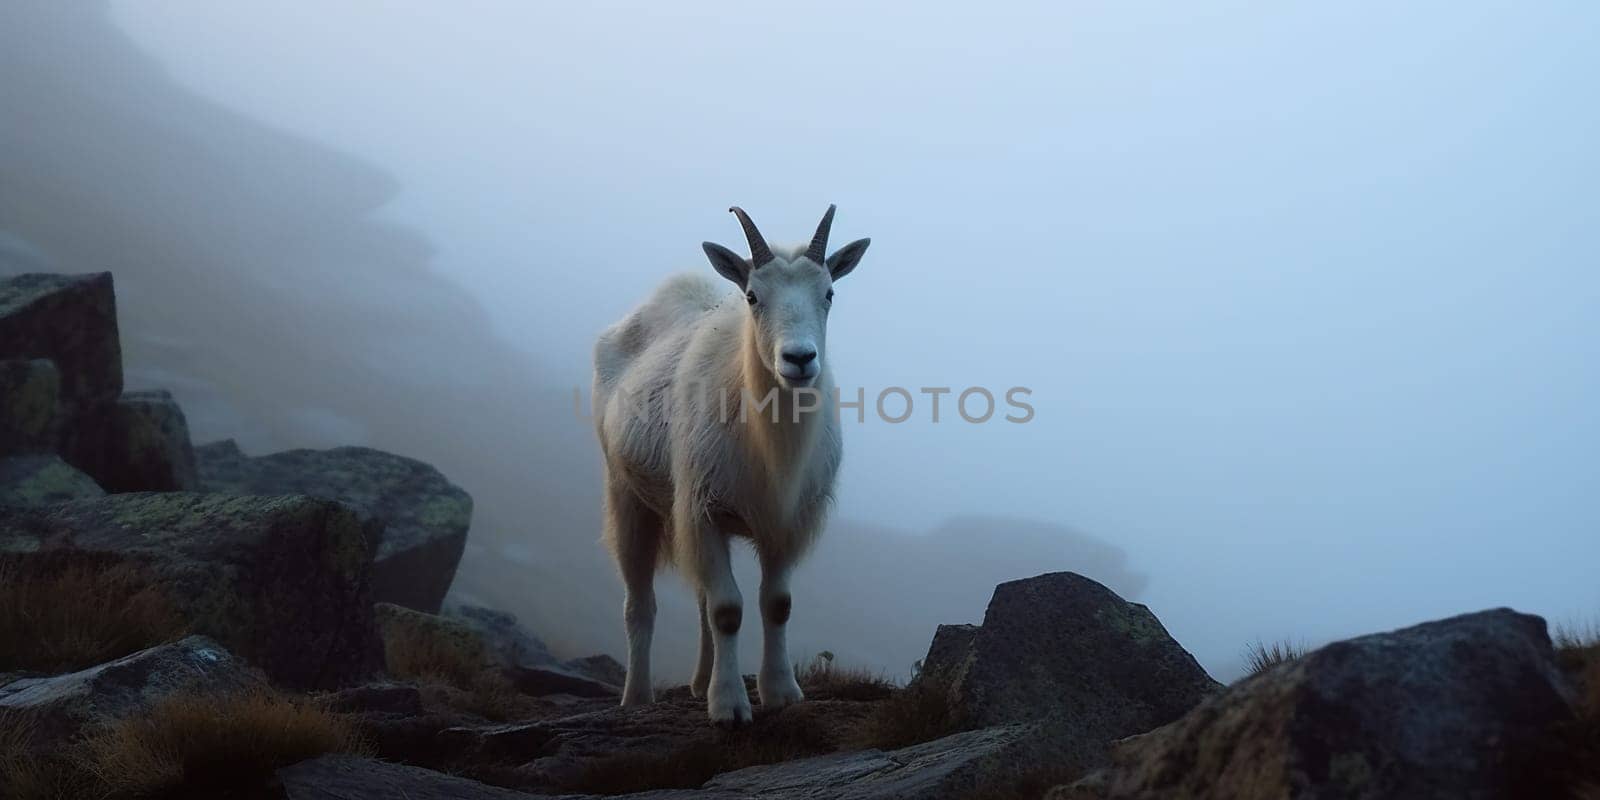 Domestic Goat On A Mountain Path In The Mist by GekaSkr